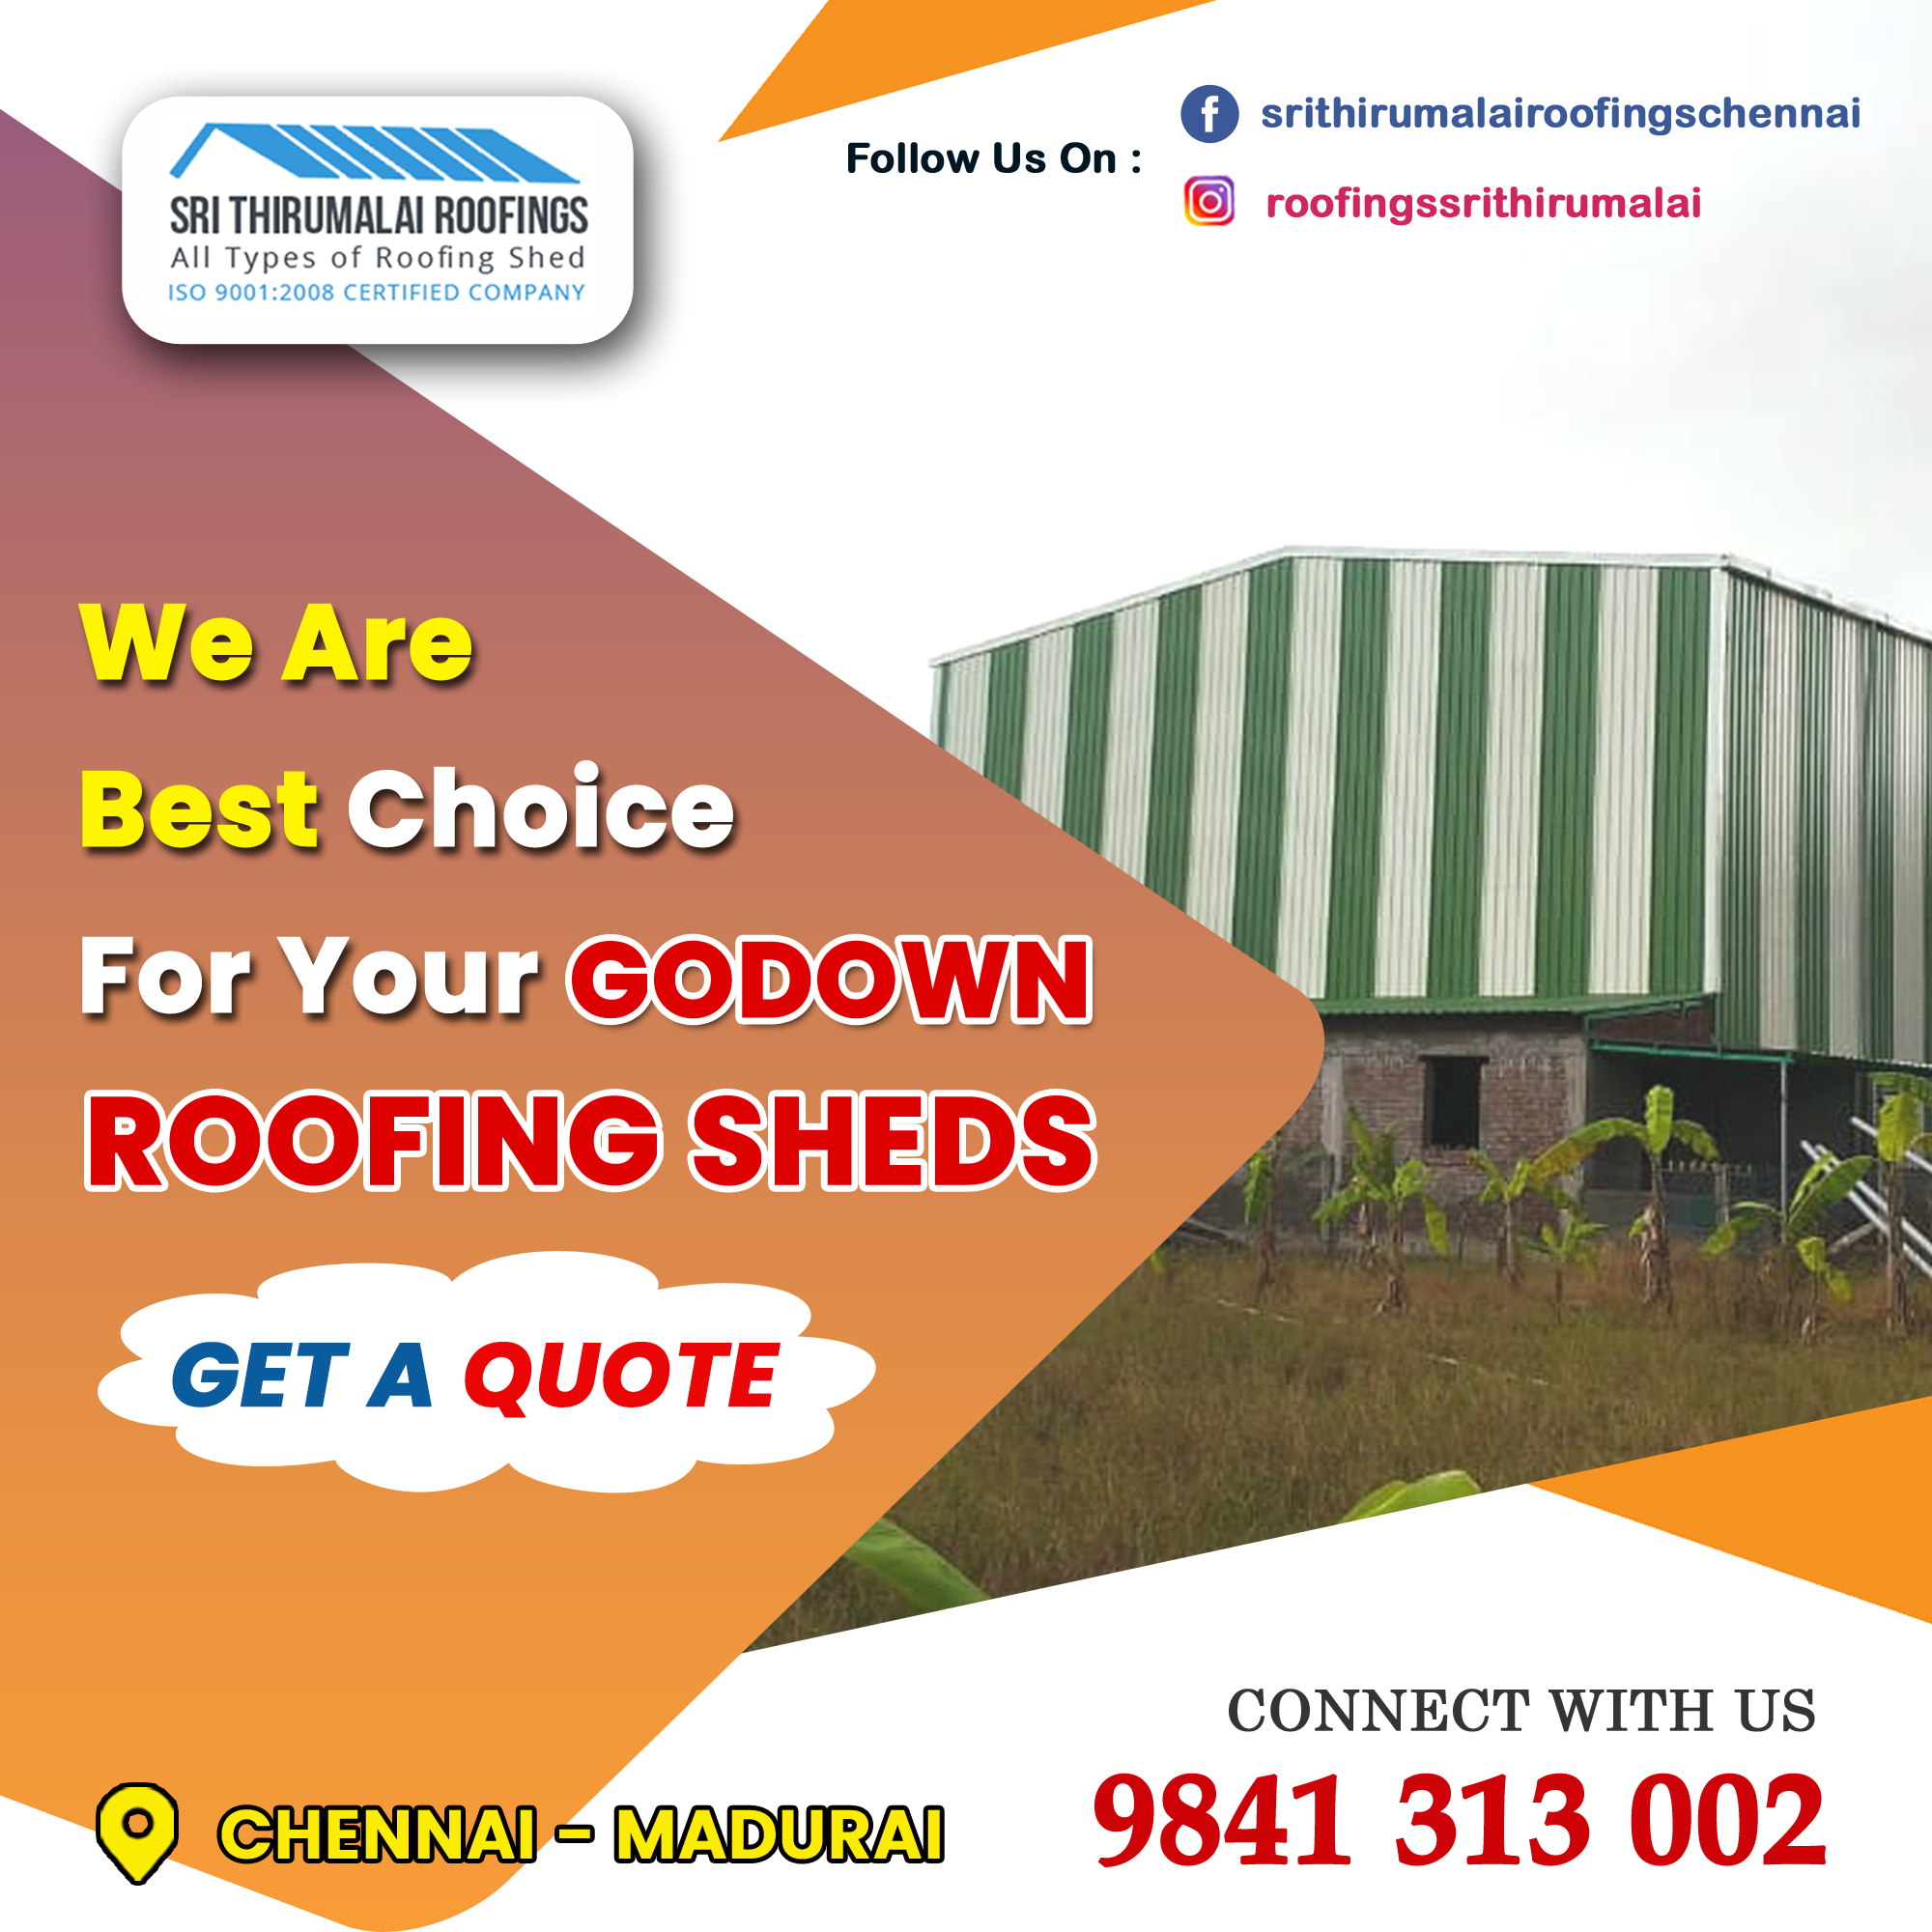 Professional Godown Roofing Construction in ChennaiServicesInterior Designers - ArchitectsAll Indiaother